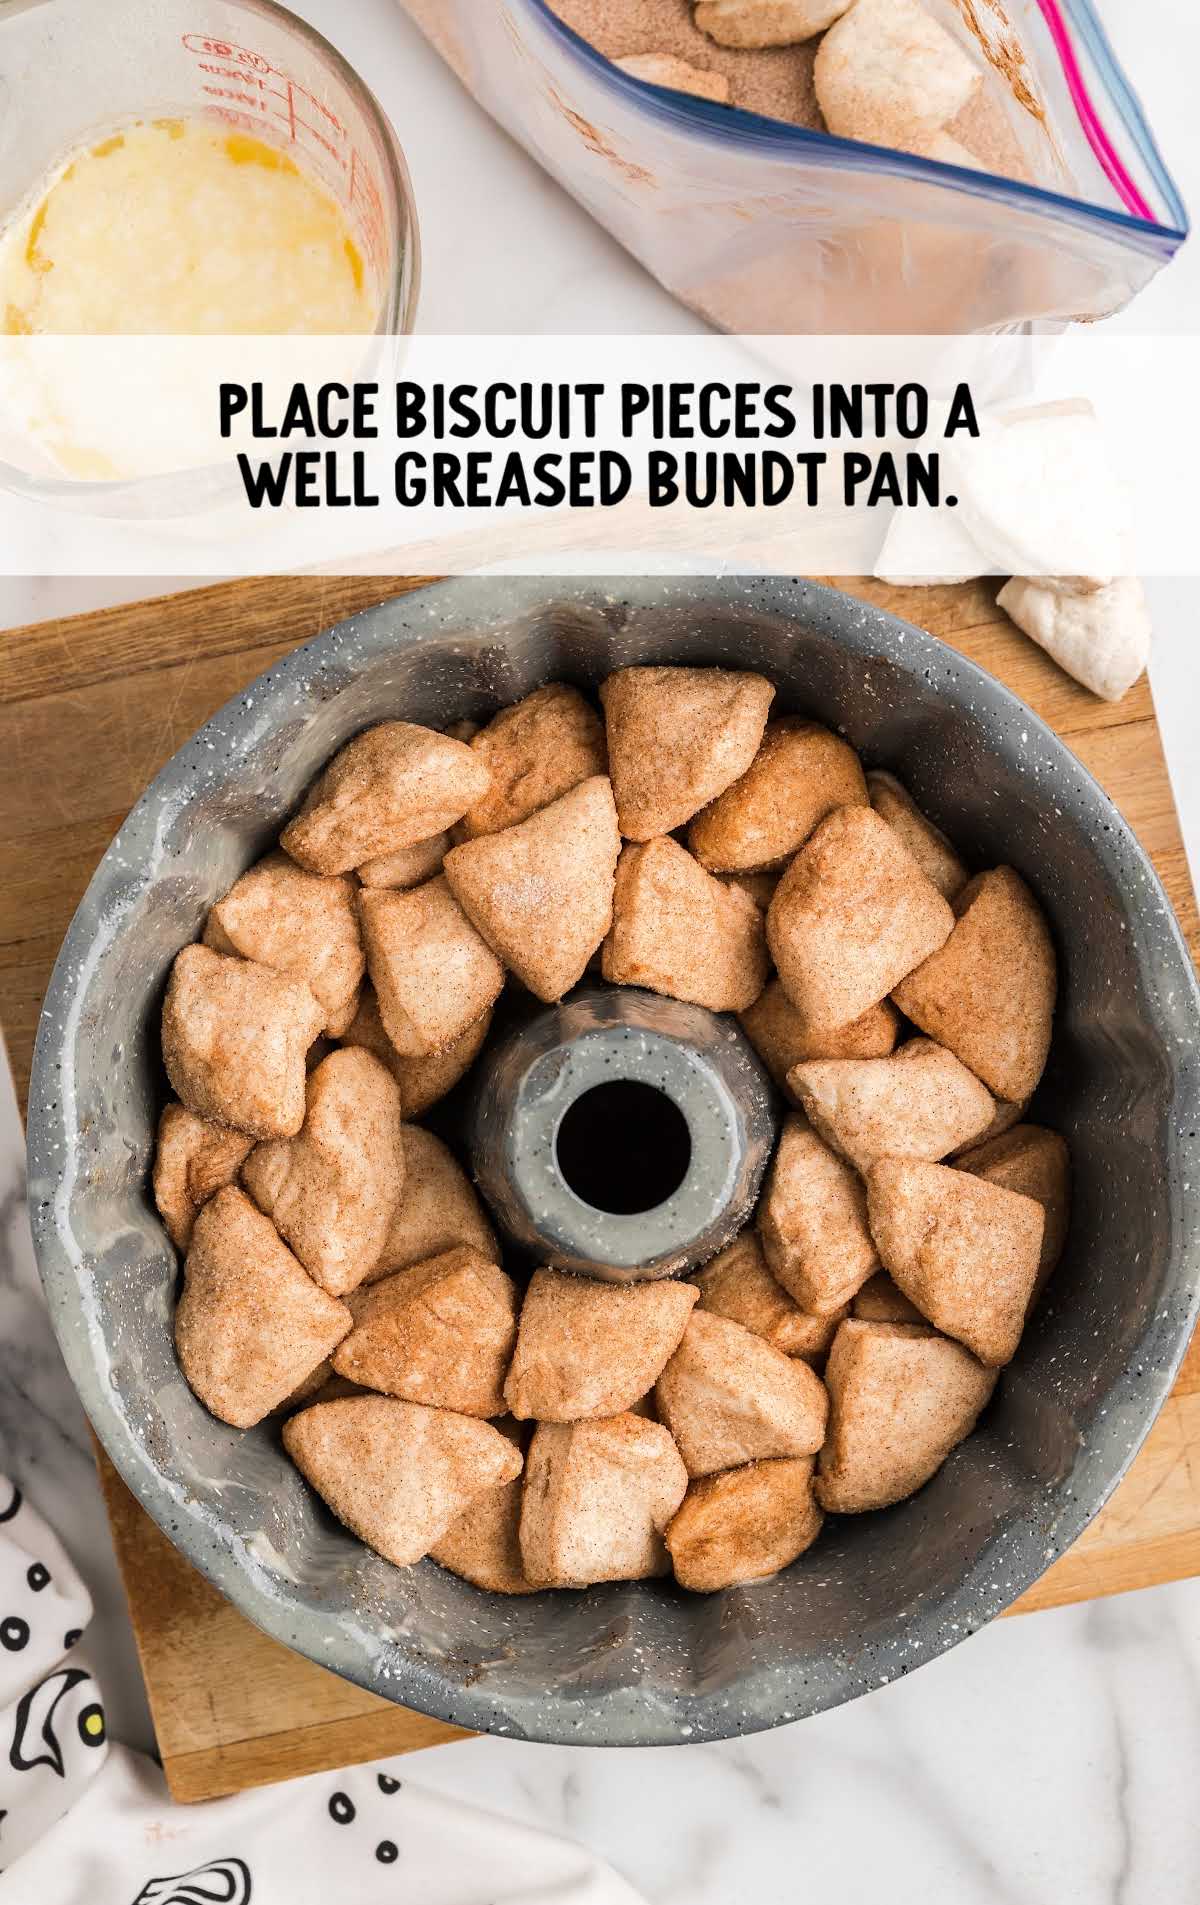 biscuits pieces placed into a greased bundt pan